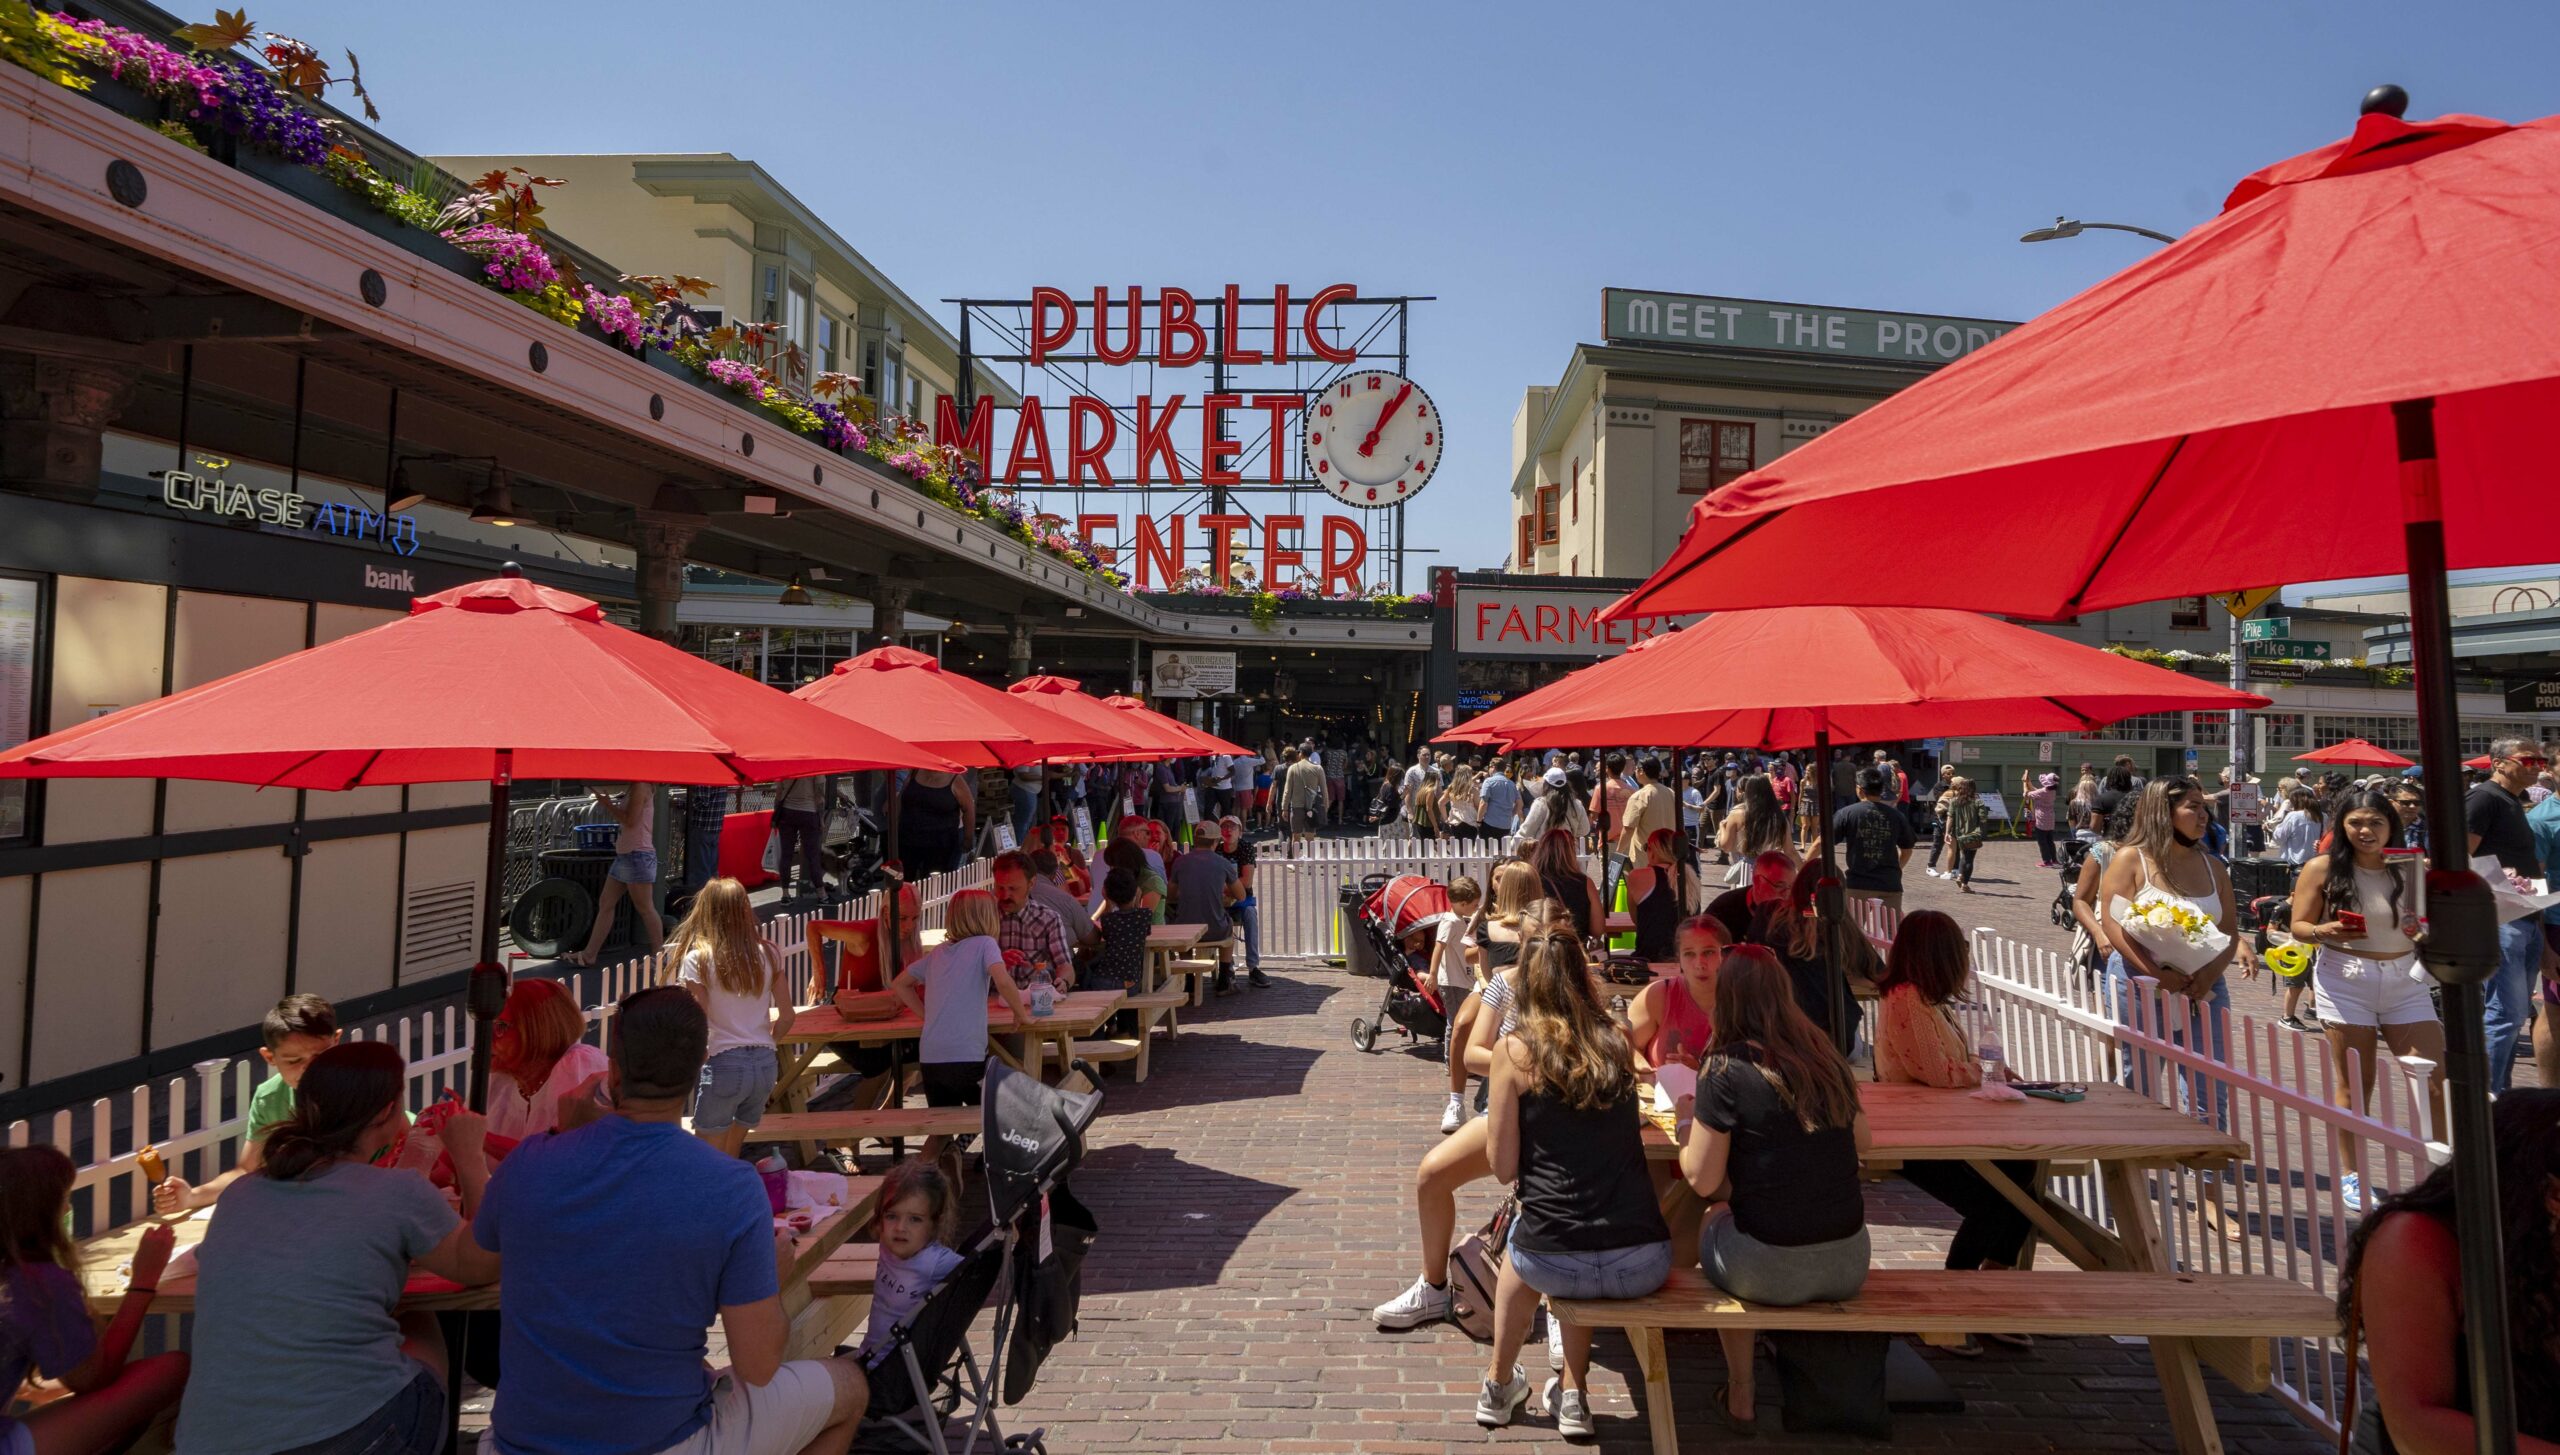 visitors siting at picnic tables in front of the famous Public Market Center Clock & Sign at Pike Place Market in Seattle